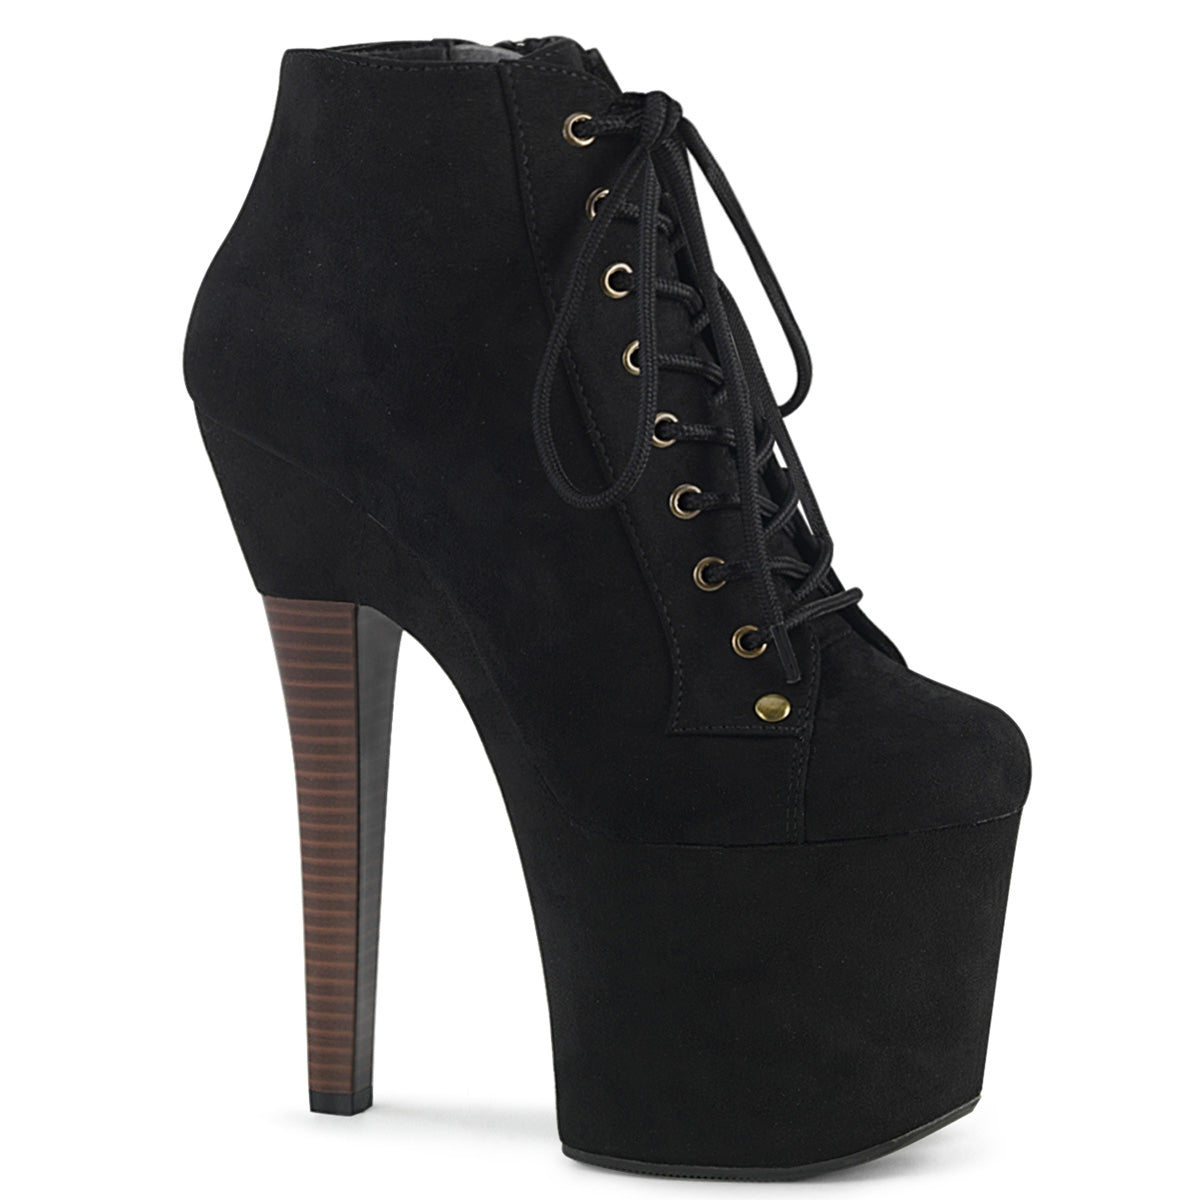 RADIANT-1005 Pleasers 7 Inch Heel Black Pole Dance Platforms Ankle Boots